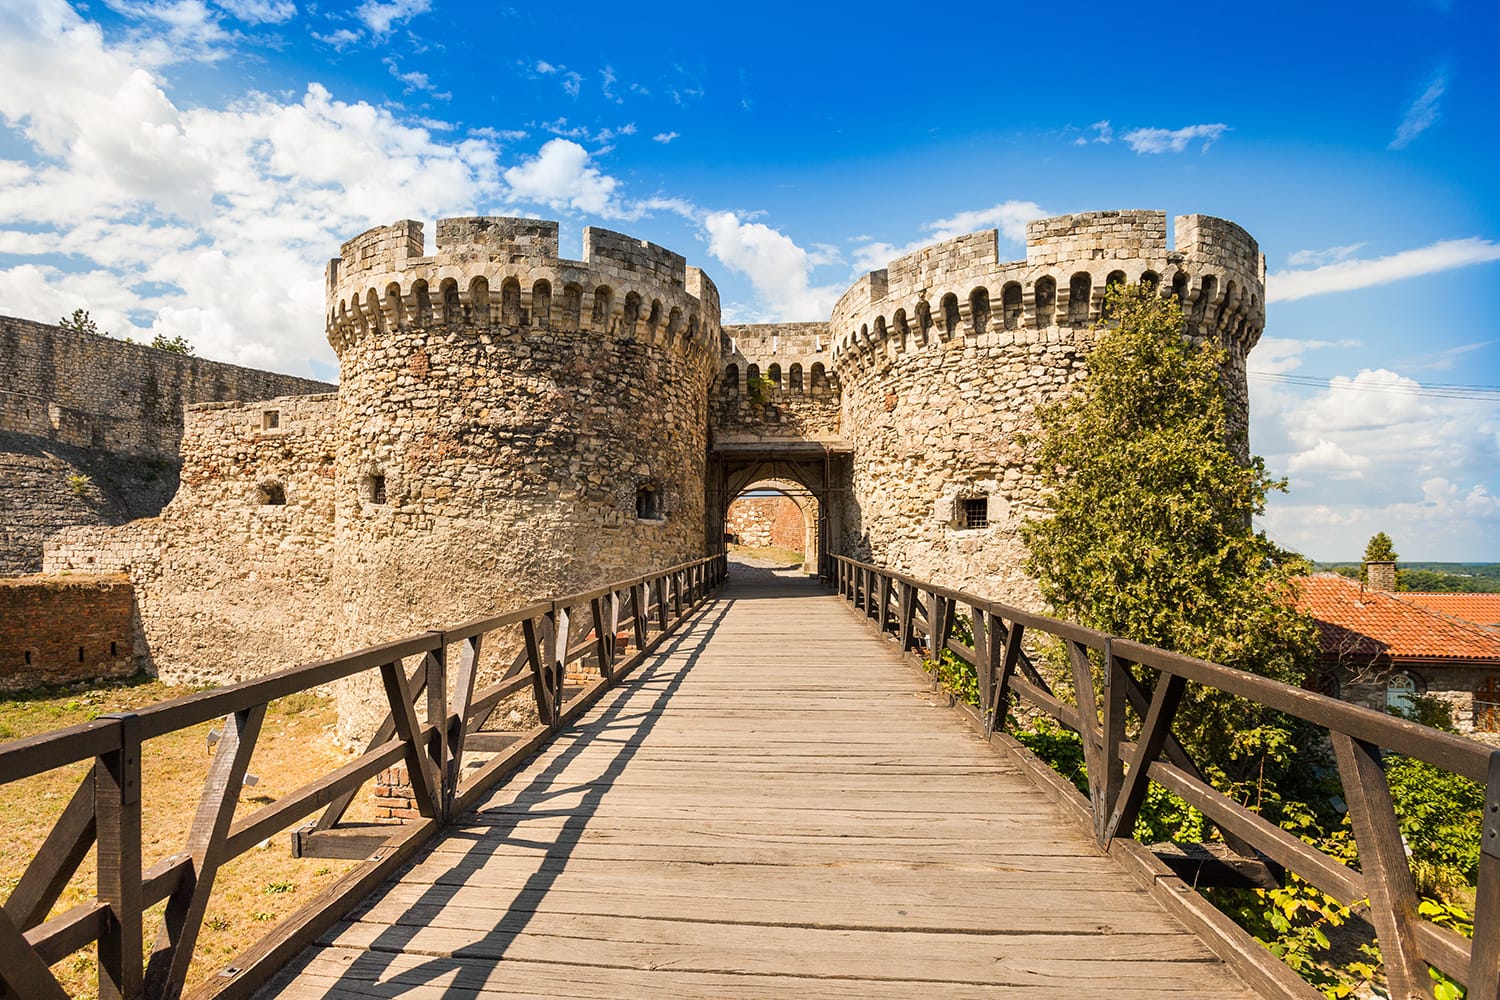 Belgrade's Kalemegdan Fortress with historic castle towers, gate, and bridge, Serbia